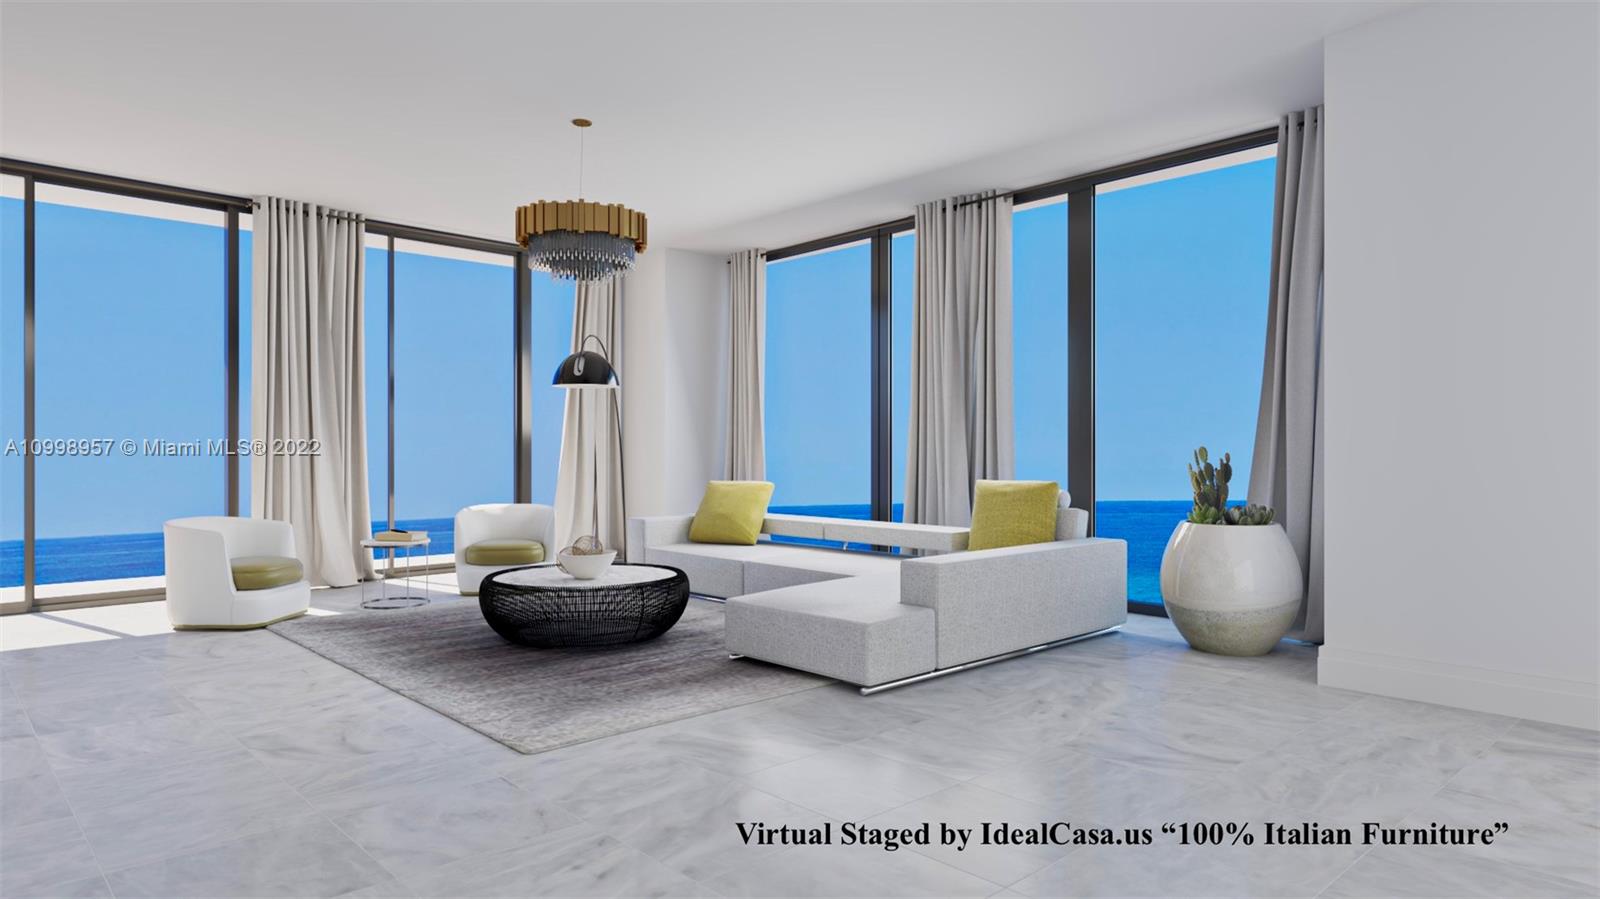 Turnberry Ocean Club Residences in Sunny Isles Beach.Tenant occupied until 10/01/ 2025. Investment property, yearly $336K gross income. New construction 2021. Unit 1804 East South corner Flow through unit from the direct ocean views to the west Bay with sunsets Views.  4 Bedrooms plus den & 5 1/2 Baths, 3,625 SqFt plus terraces. Private elevator foyer. This unit has 10' Ceilings, very illuminated. Italian Kitchen "Snaidero", white stone countertops, top-of-the-line appliances Gaggenau. Large master bedroom with 2 walk-in closets. Building with six-floor amenities, beach service, three swimming pools, private dining, Hydrotherapy Spa, a fitness center, and entertainment. Bar and restaurant with full kitchen. Privileges of Turnberry Isle Resort, tennis, and Marina activities.